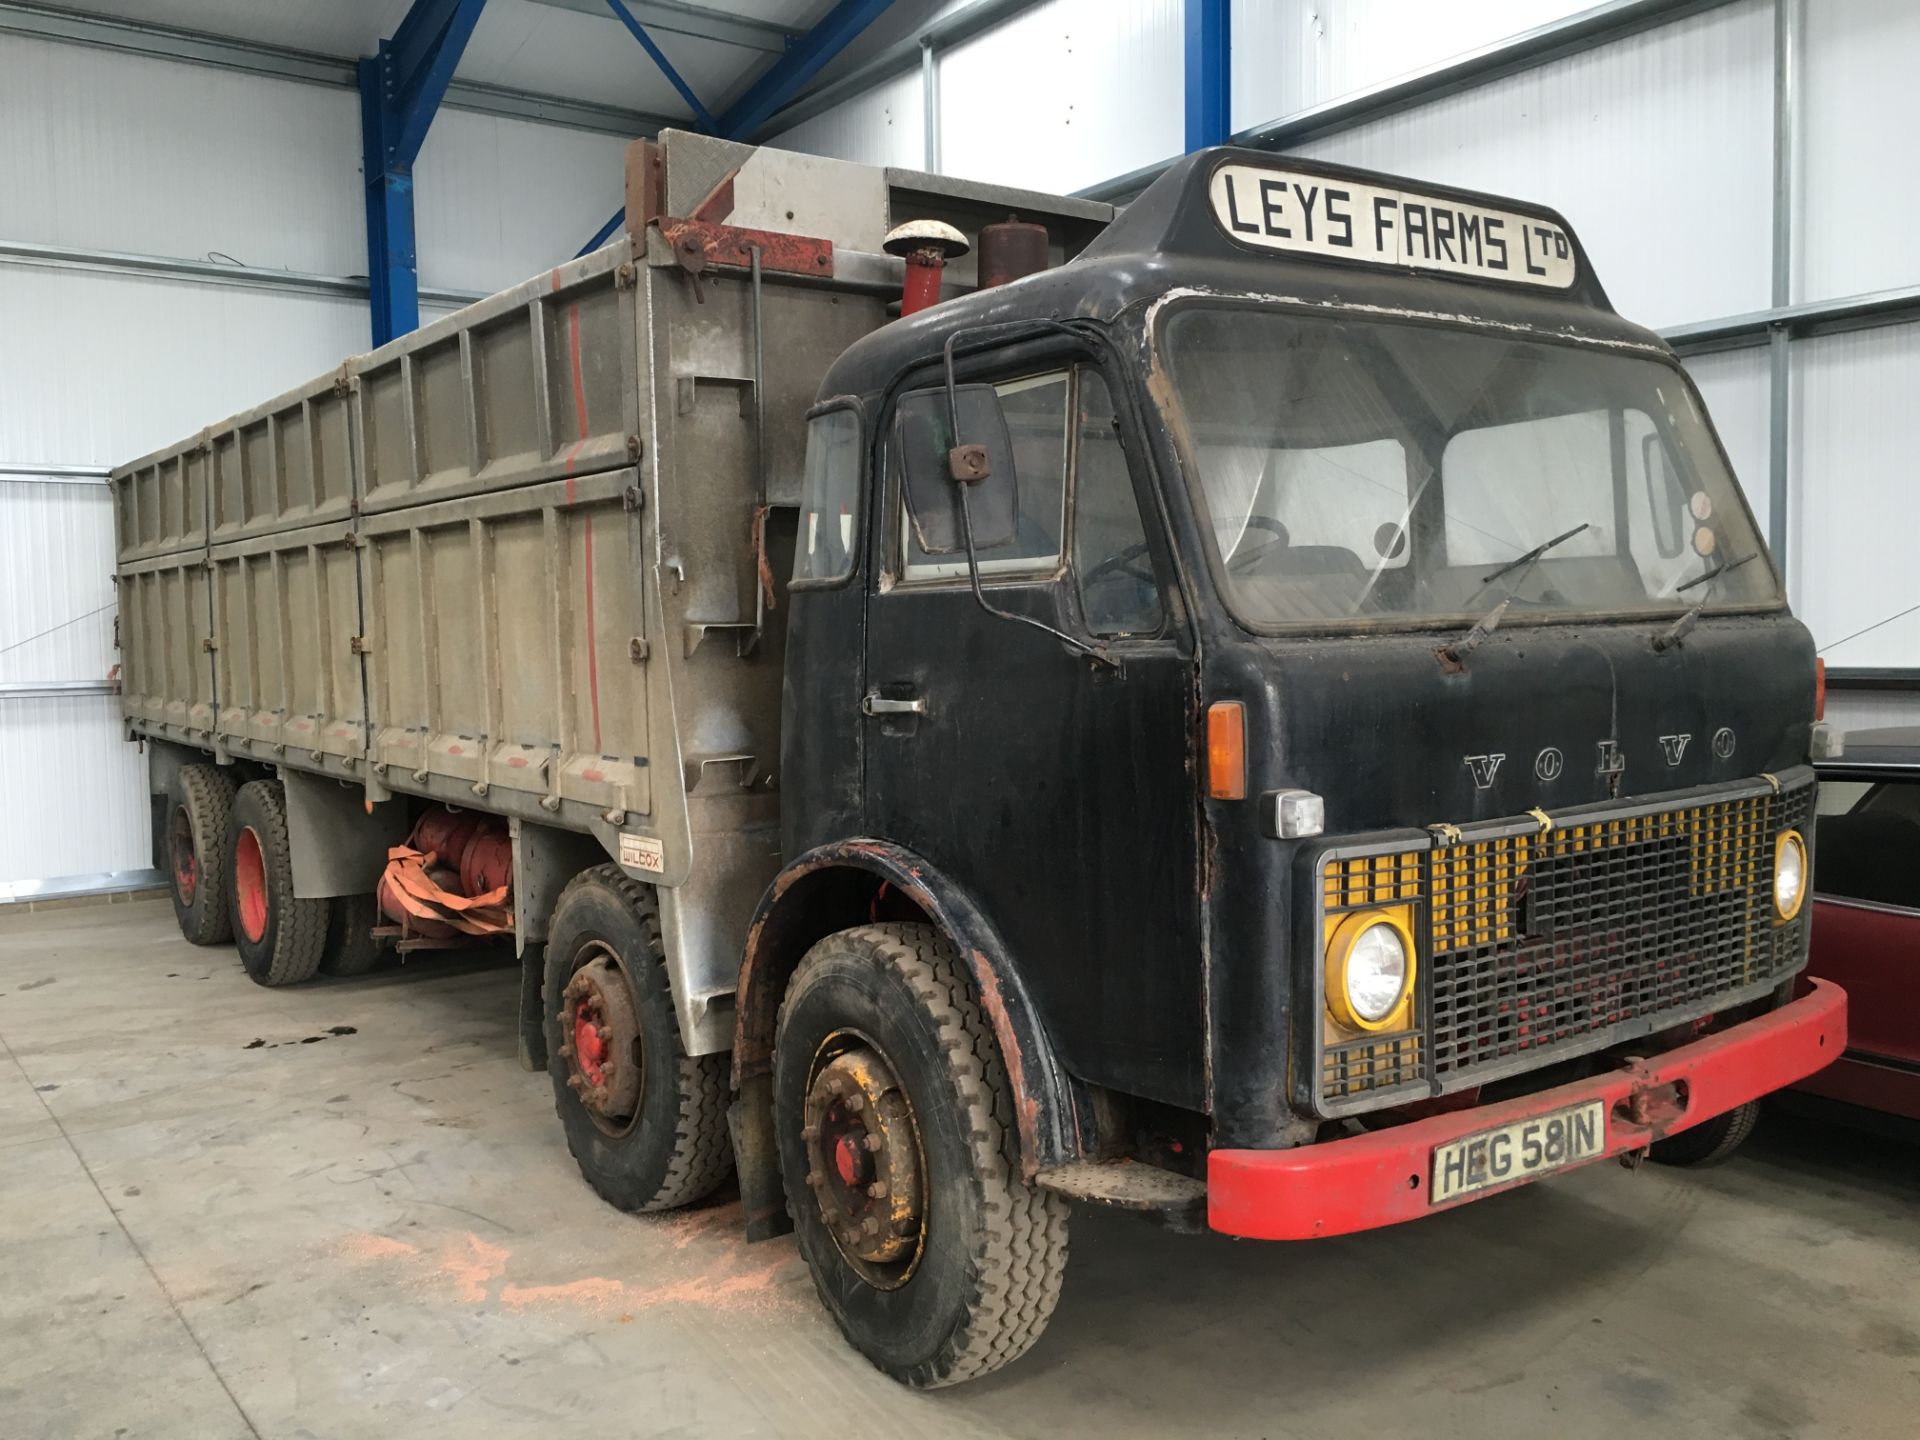 1975 Volvo F86 8 x 4 Tipper Reg. No. HEG 581N Chassis No. AT74028 This F86 is liveried for Leys